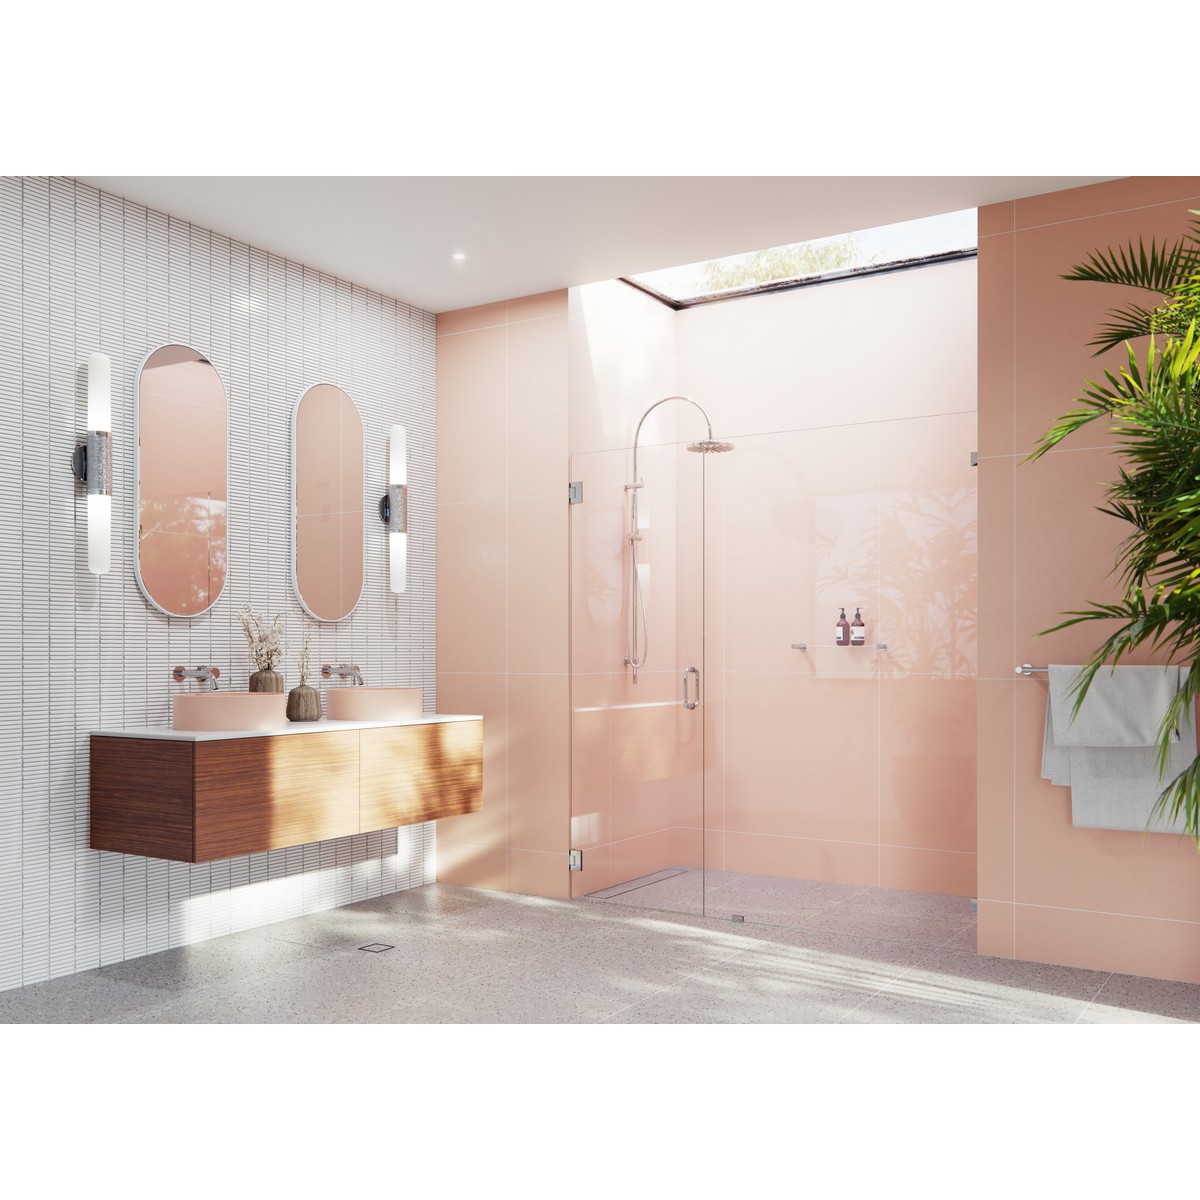 GLASS WAREHOUSE GW-WH-74.25 ILLUME 74 1/4 W X 78 H WALL HINGED FULLY FRAMELESS GLASS SHOWER ENCLOSURE